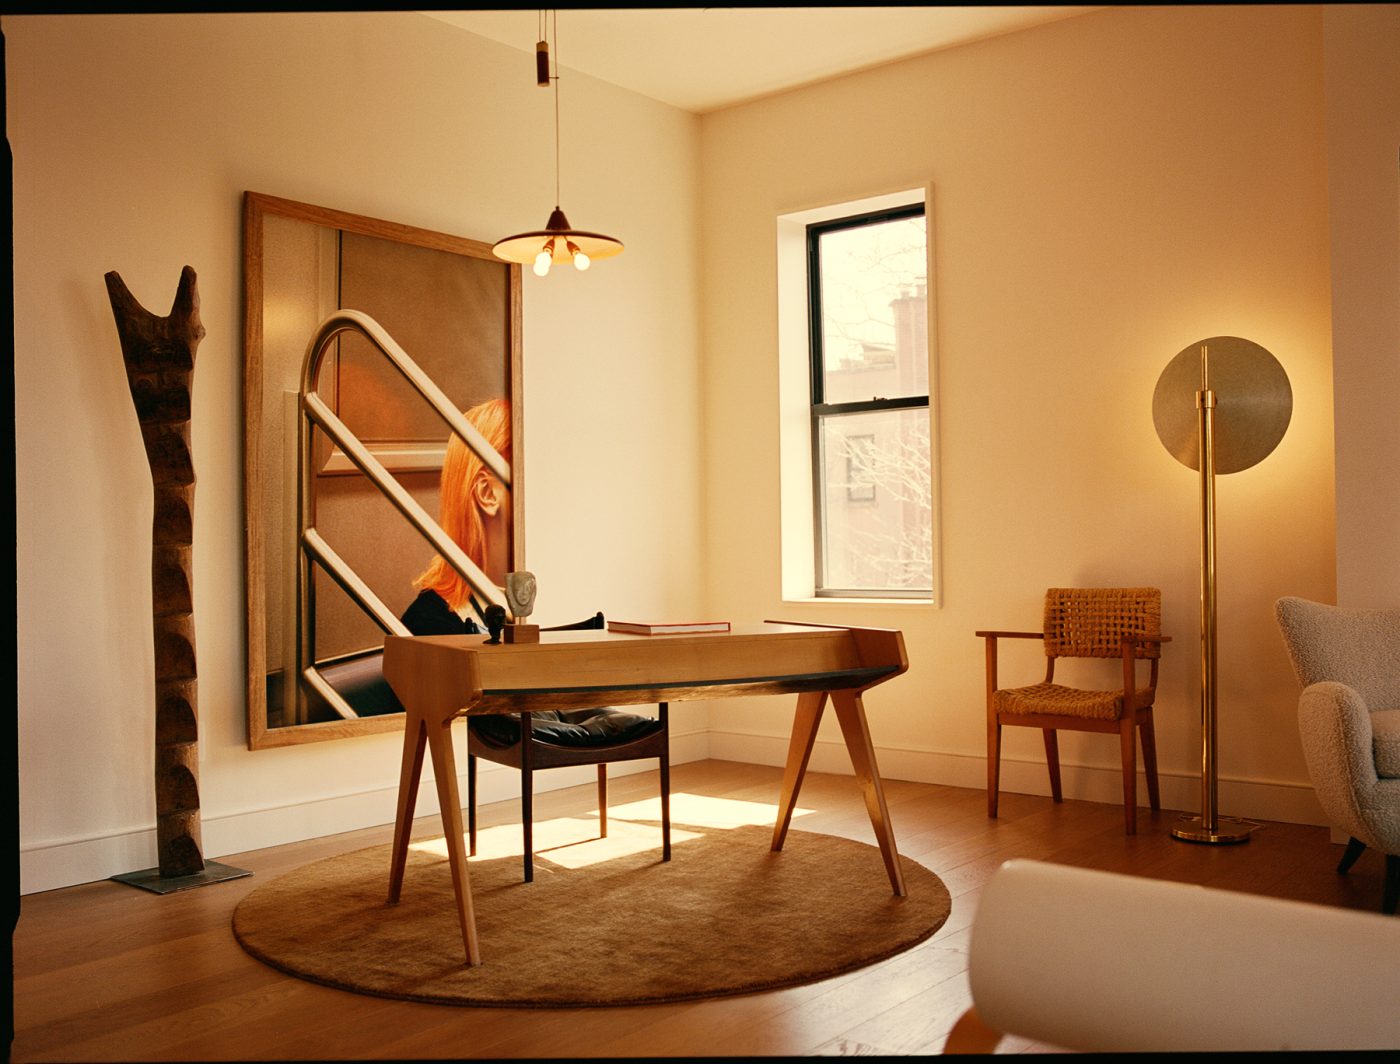 The Brooklyn apartment, featuring Lunch Poem, by Clement Pascal, a desk, a Kristian Vedel Modus leather chair and a rope chair by Adrien Audoux and Frida Minet